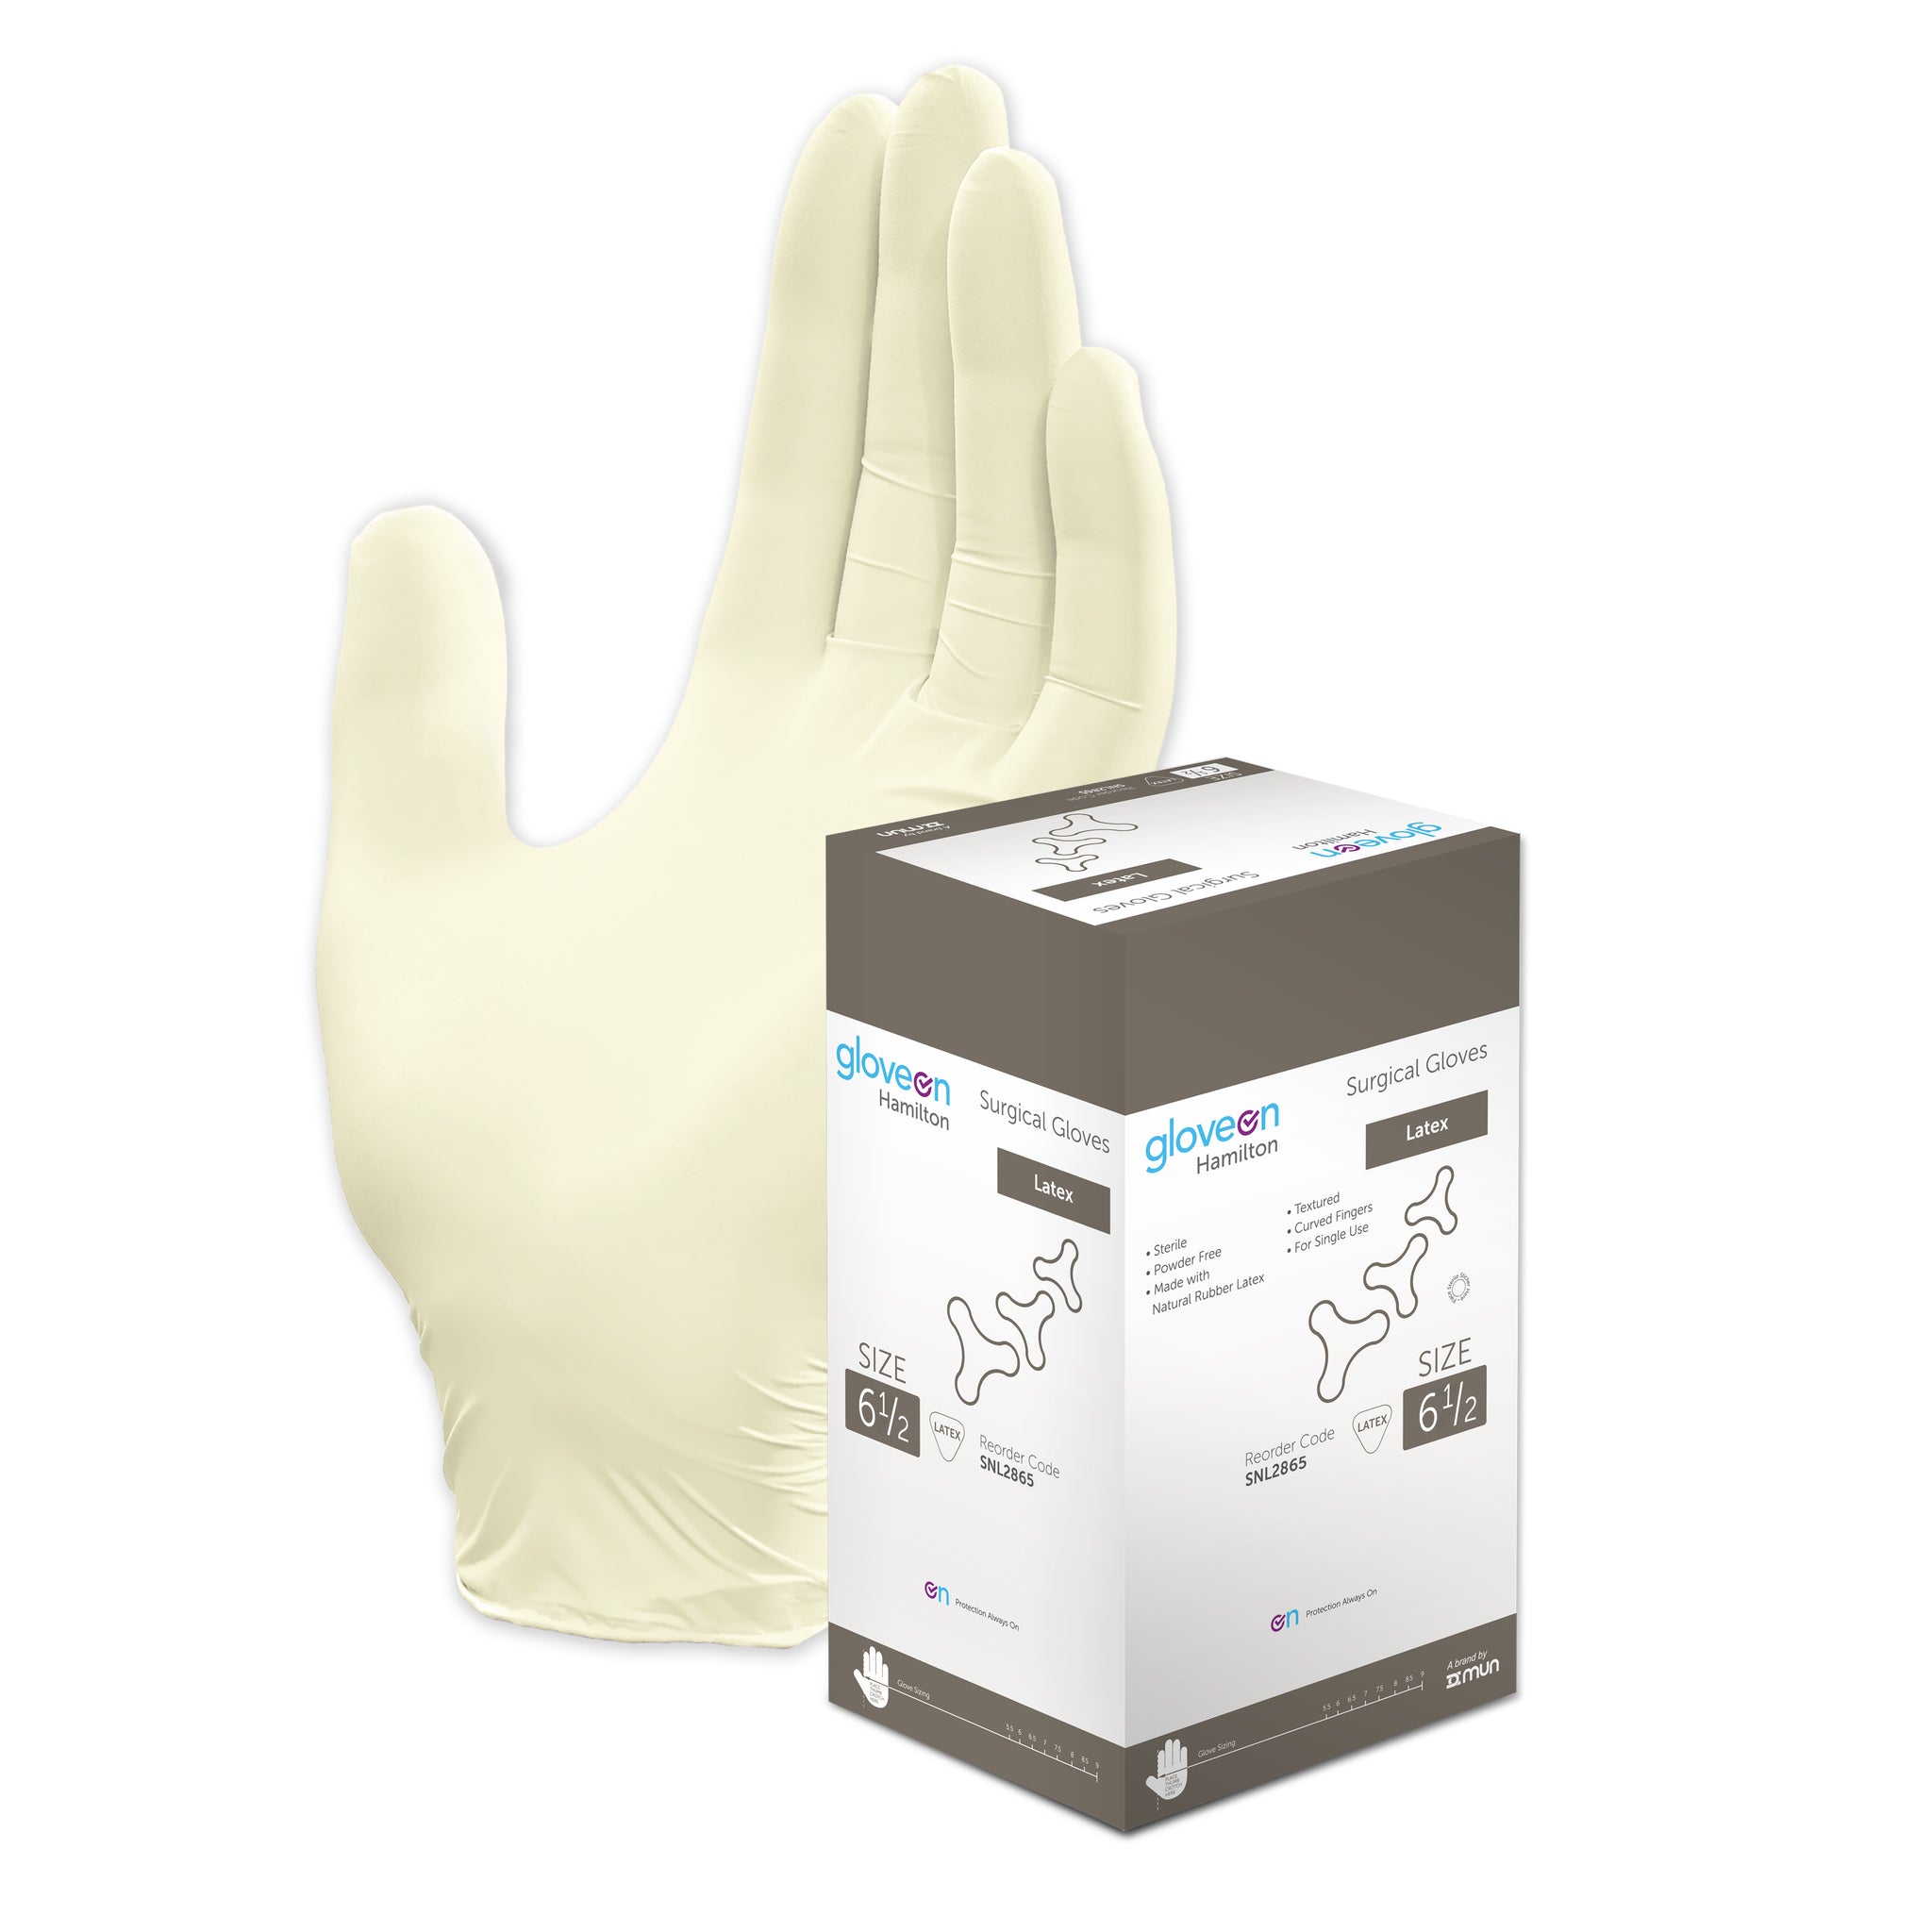 Latex, Powder Free, Textured, Curved Fingers, Sterile, Natural Colour - Box of 100, 6.5